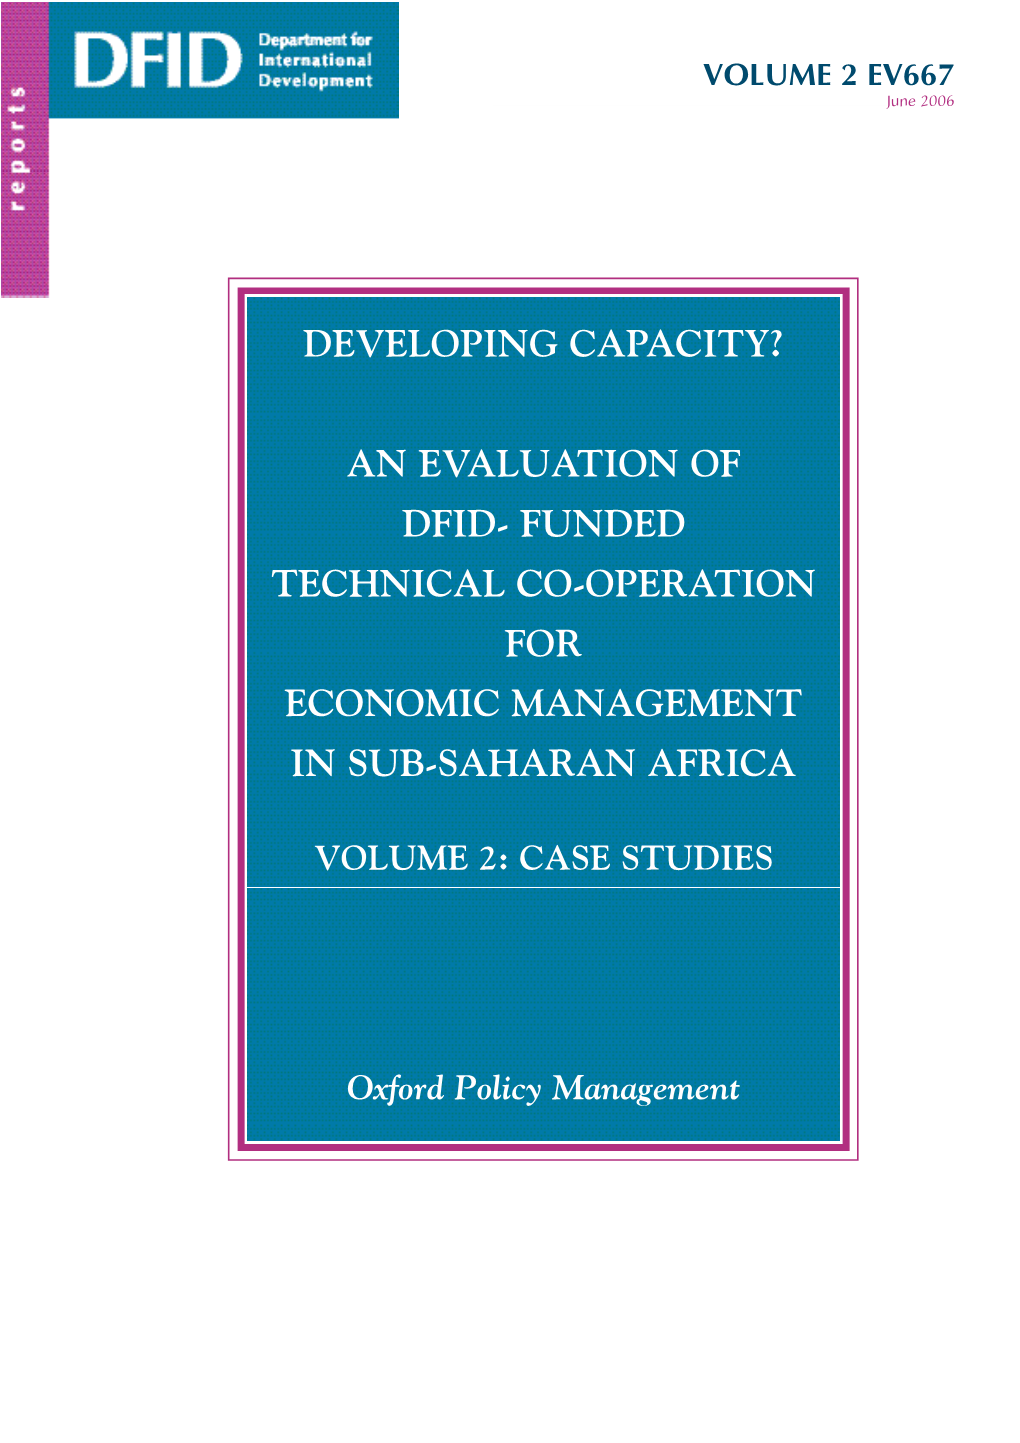 An Evaluation of DFID-Funded Technical Co-Operation For